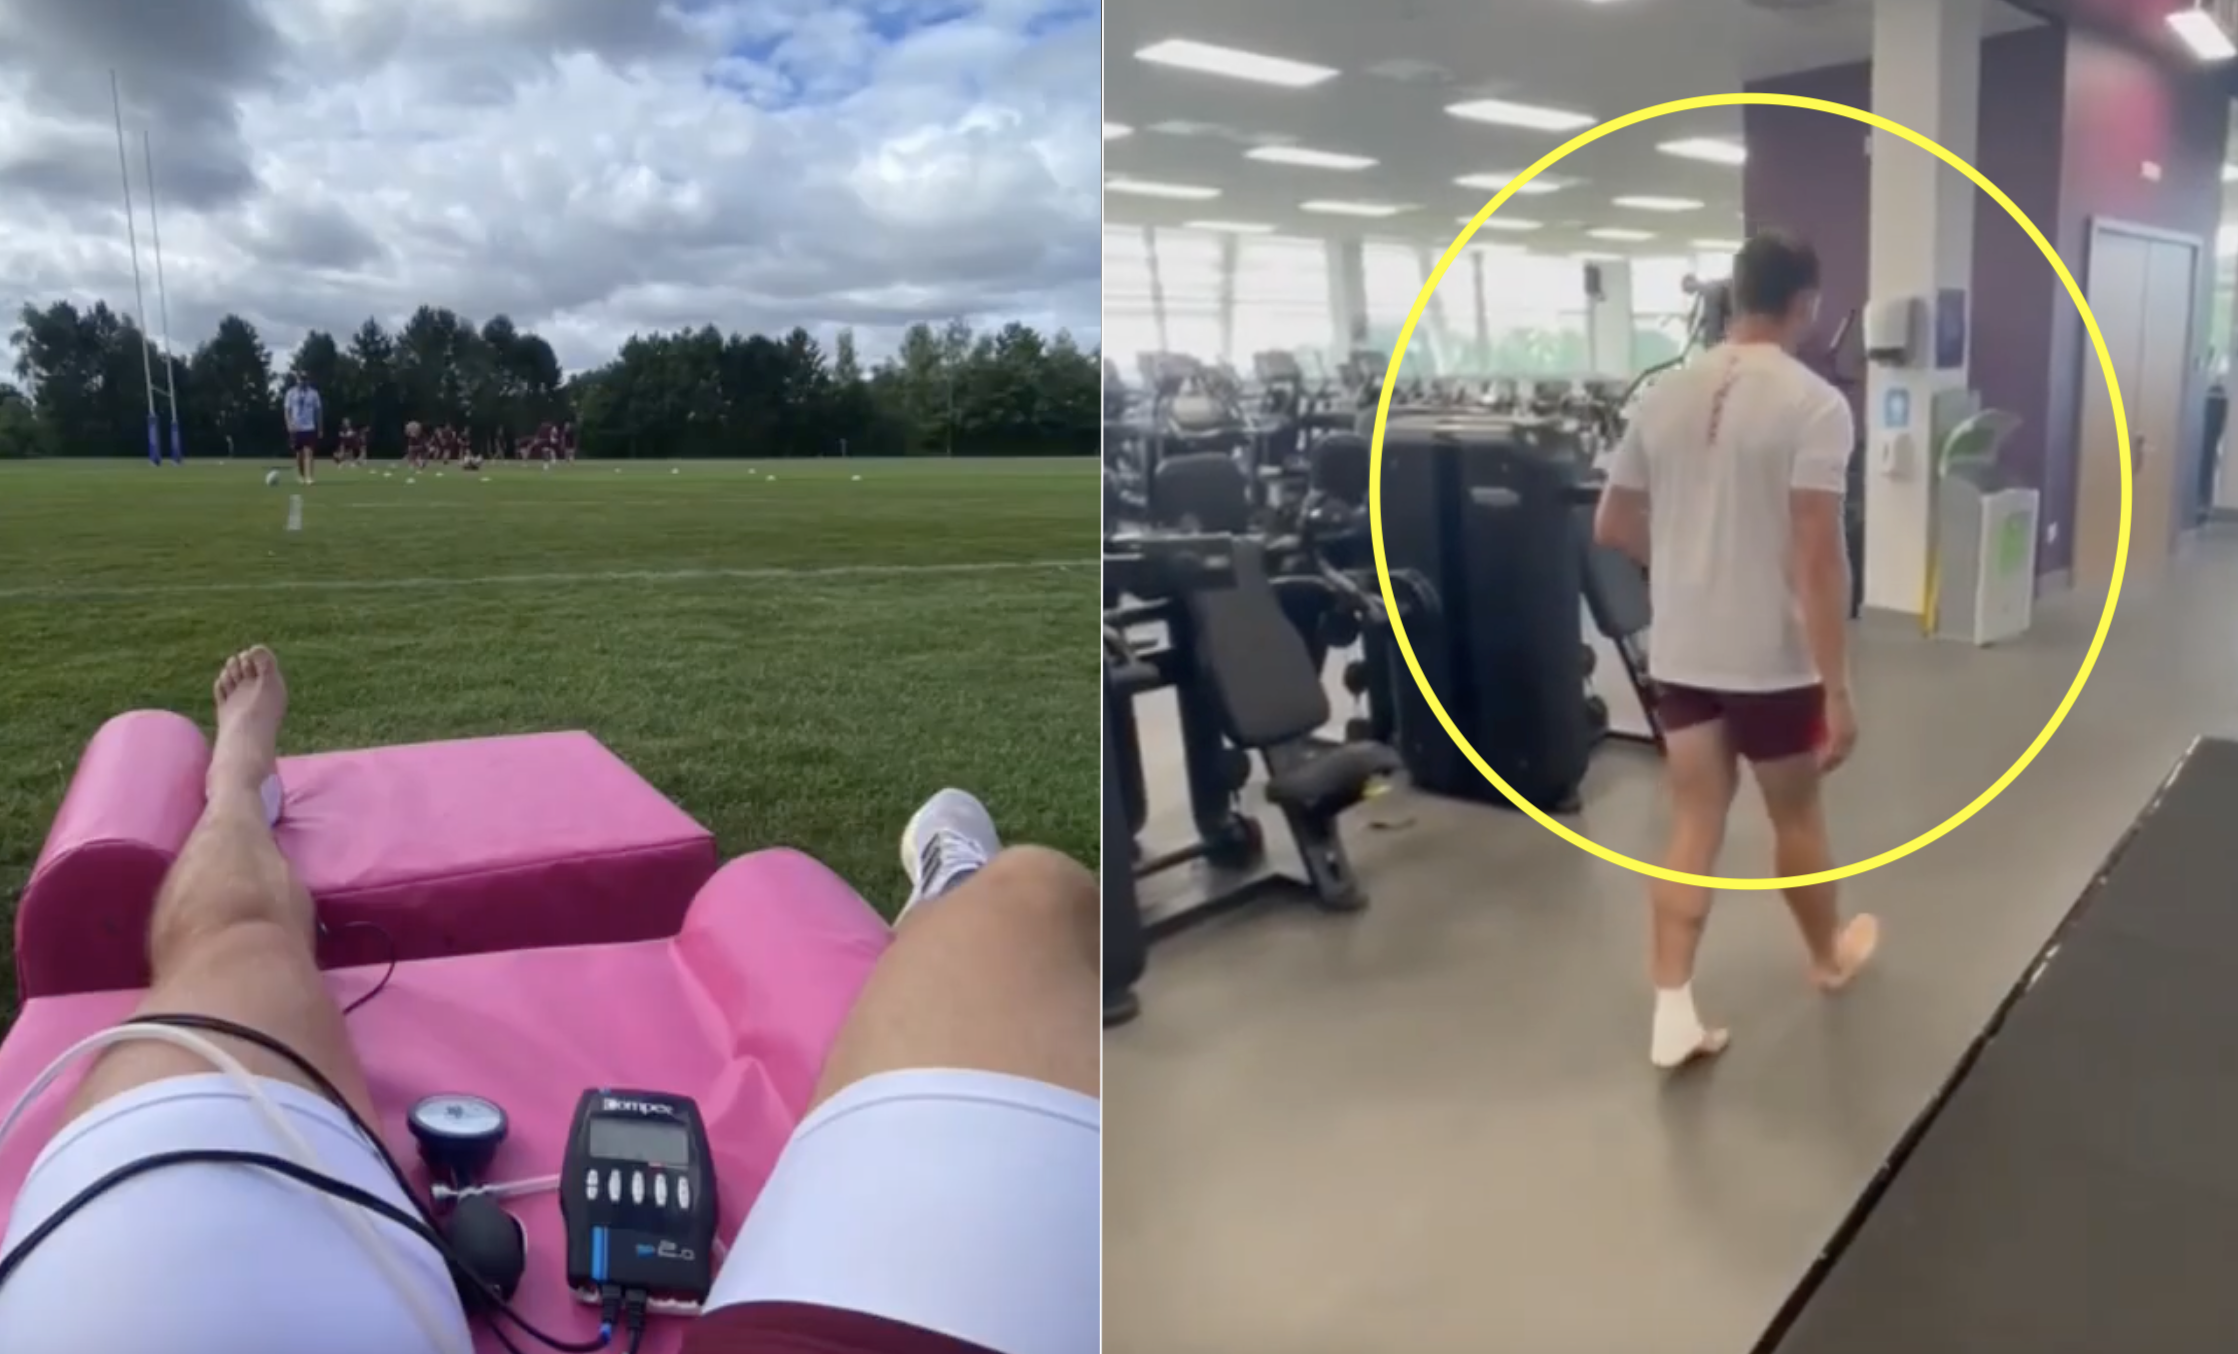 England star shows superhuman recovery abilities after serious injury